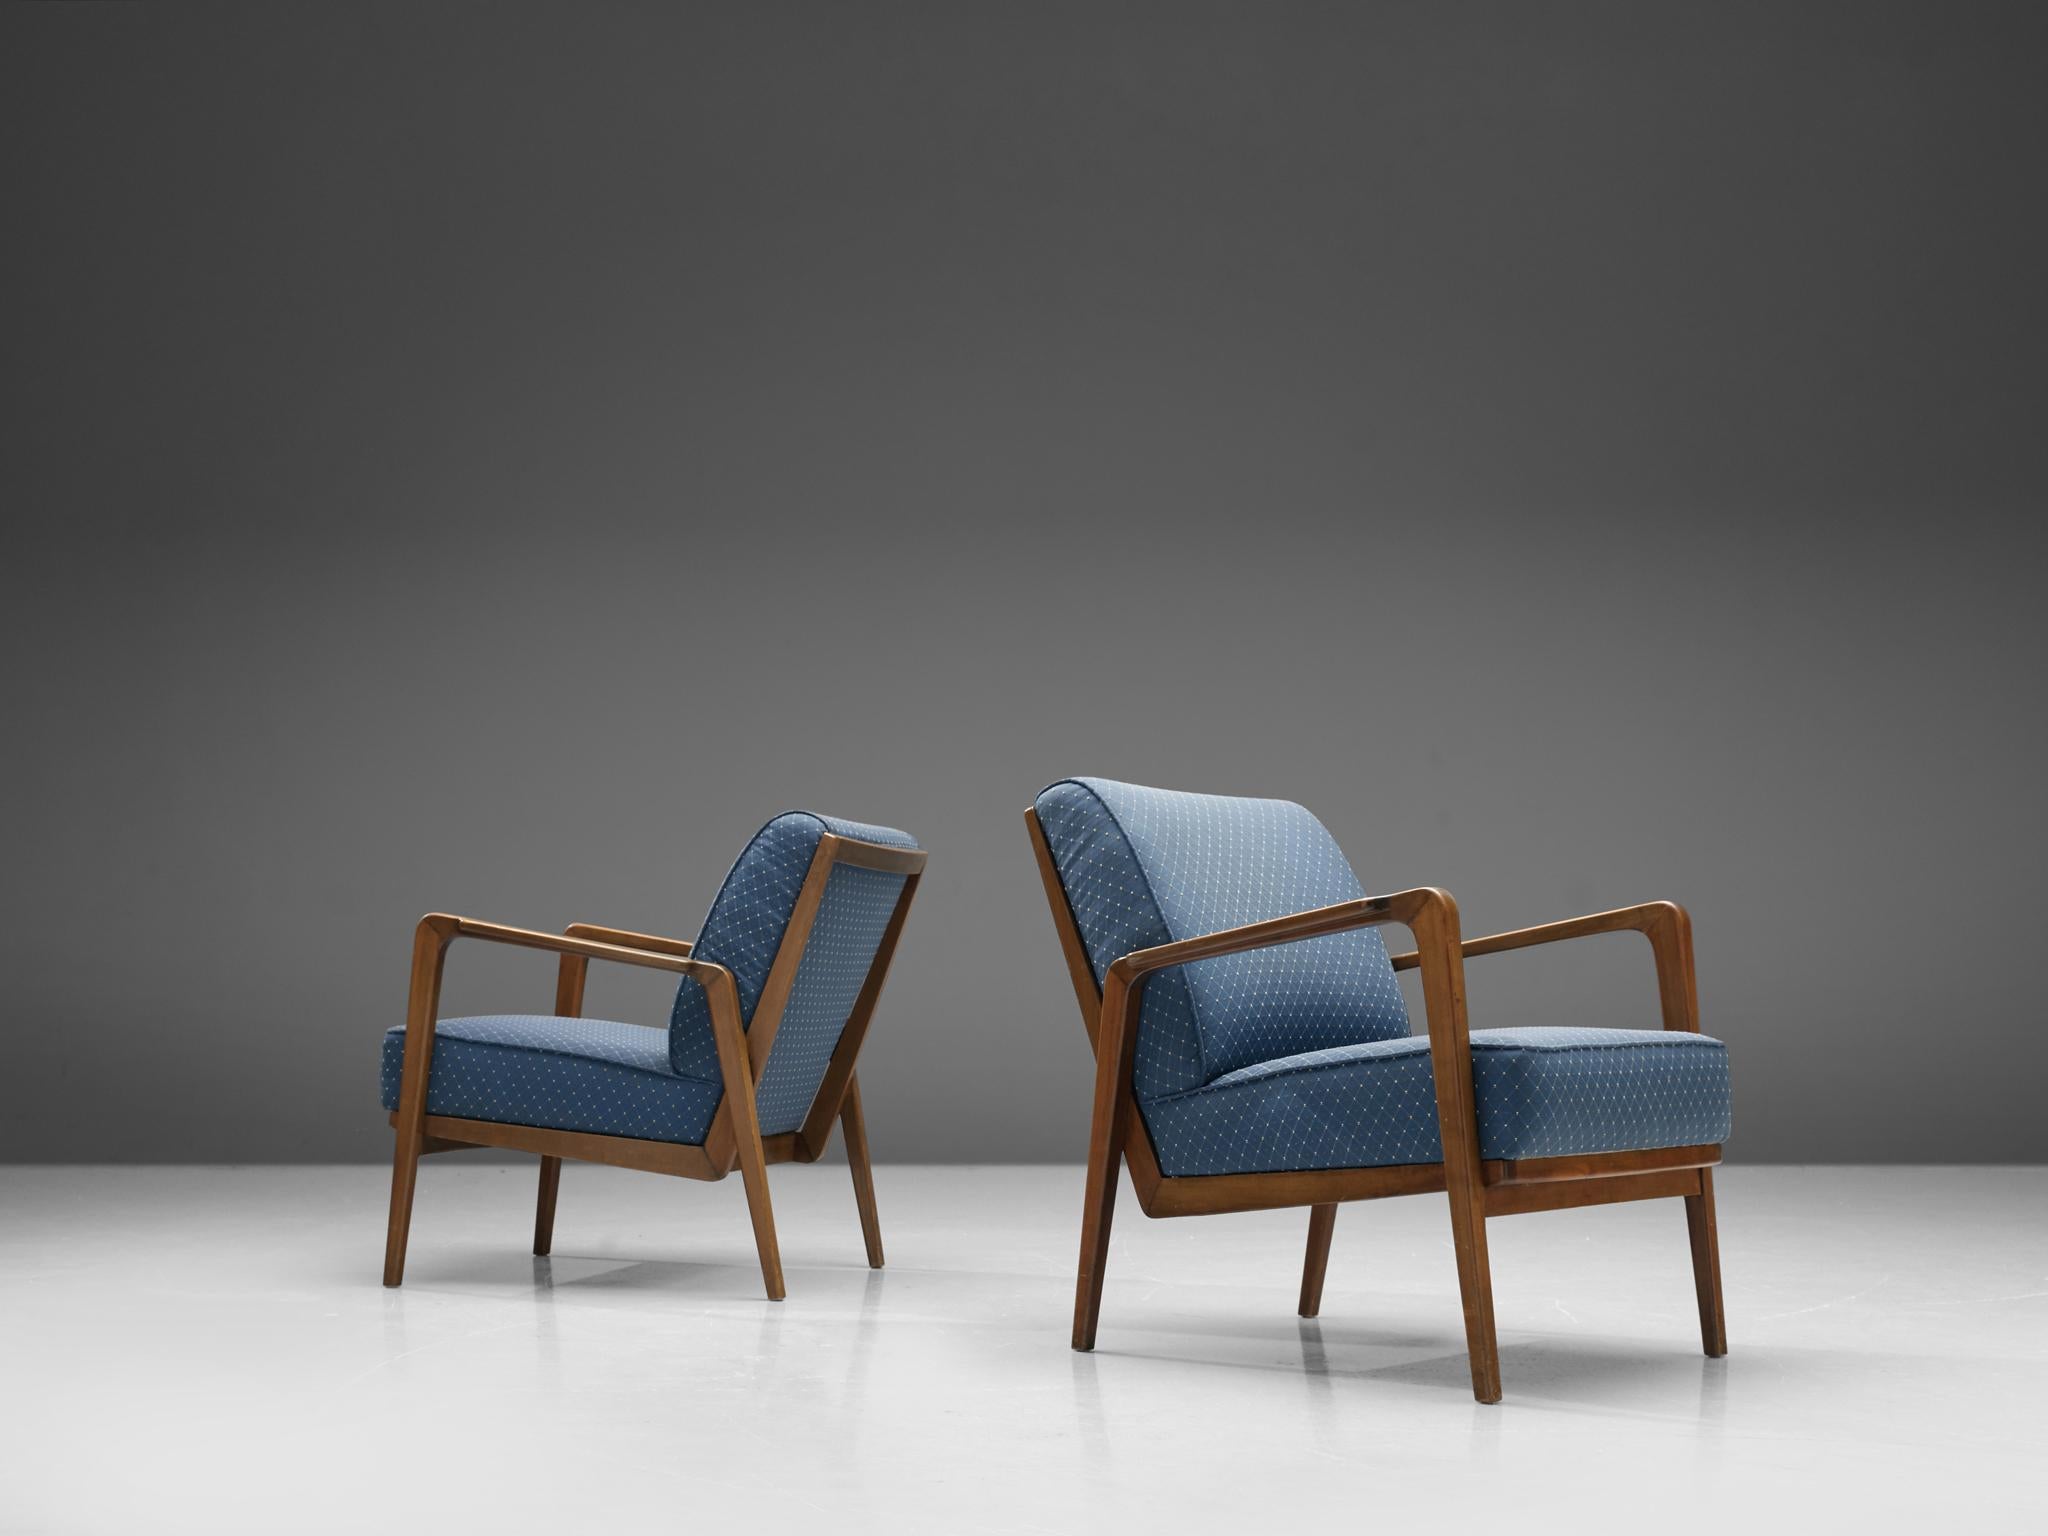 Emiel Veranneman, Two easy chairs 'La Chaise' , in mahogany and blue upholstery, Belgium, 1952.

Pair of elegant armchairs with blue upholstery by the Belgian designer Emiel veranneman. The thick, comfortable cushions make a wonderful chair to sit